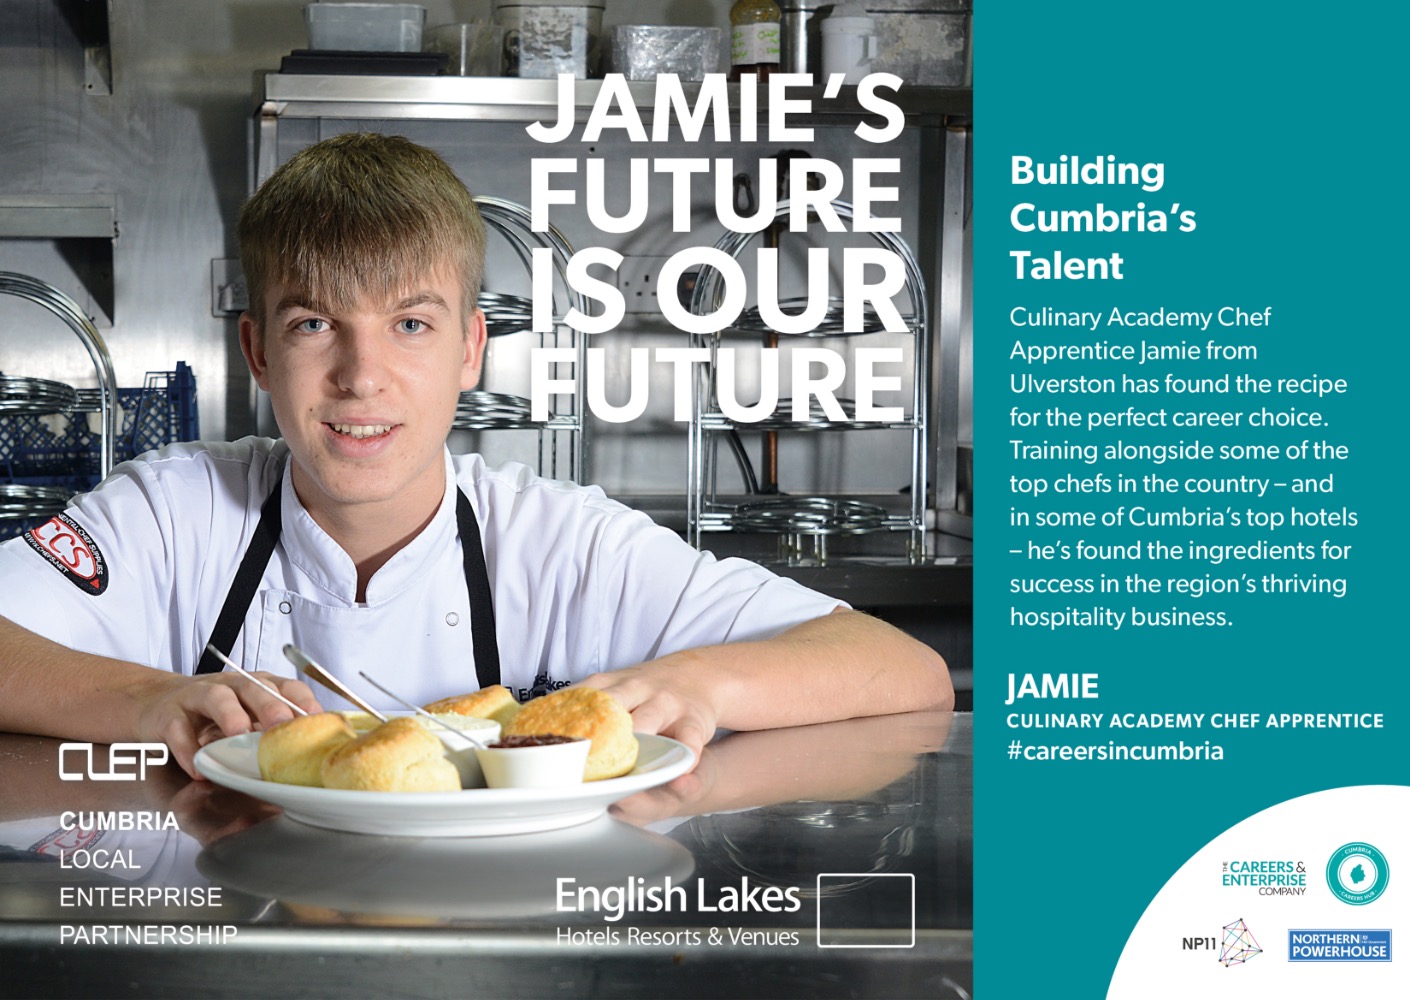 Building Cumbria's Talent - Culinary Academy Chef Jamie from Ulverston has found the recipe for the perfect career choice. Training alongside some of the top chefs in the country - and in some of Cumbria's top hotels - he's found the ingredients for success in the region's thriving hospitality business. (Photo of Jamie, academy chef apprentice).